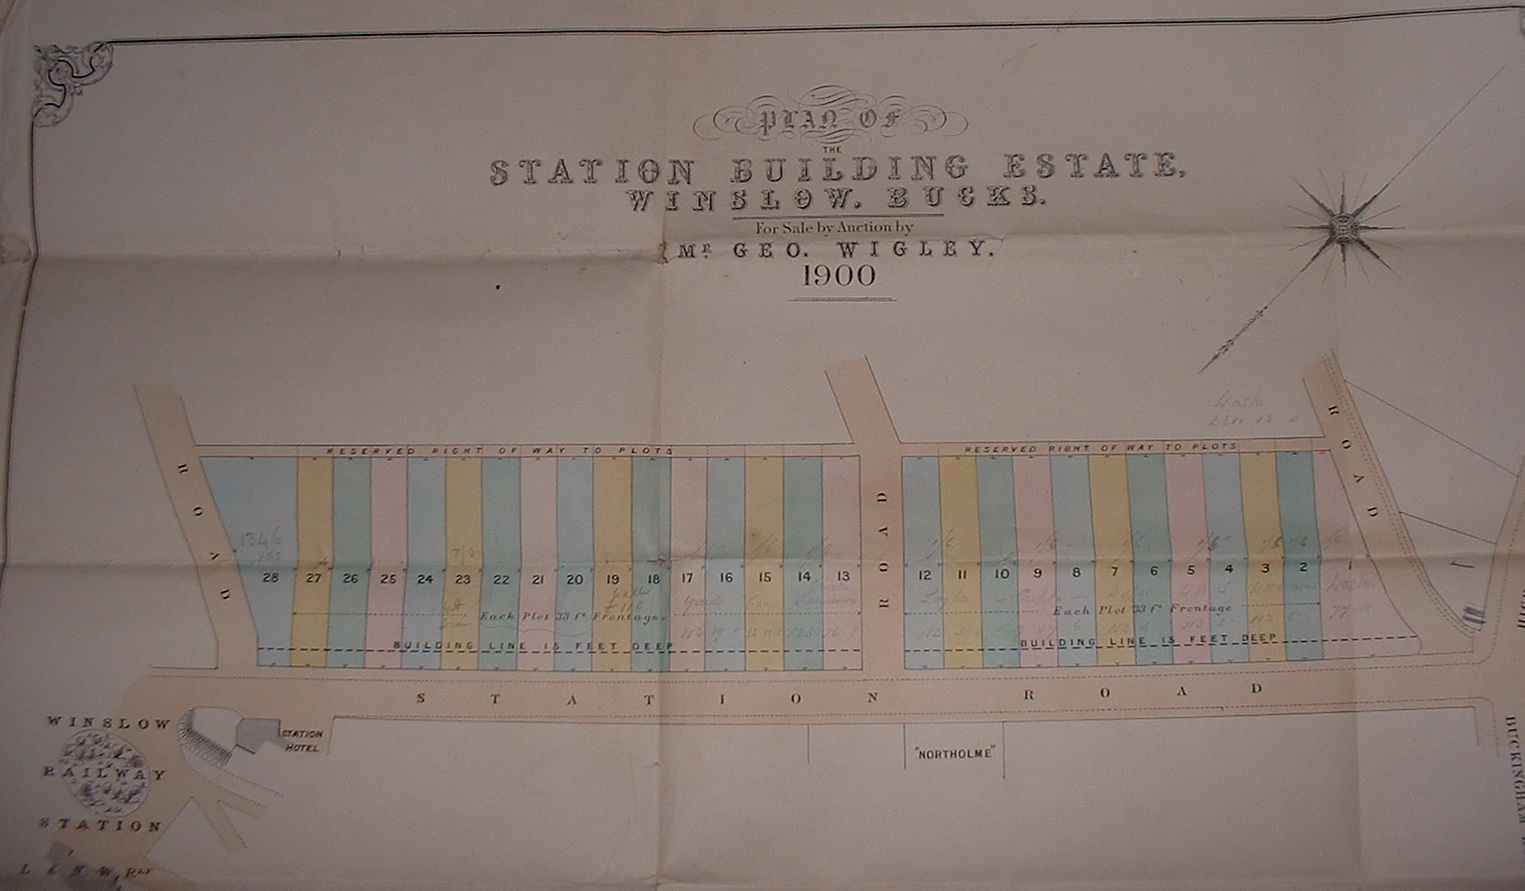 Plan from 1900 sale